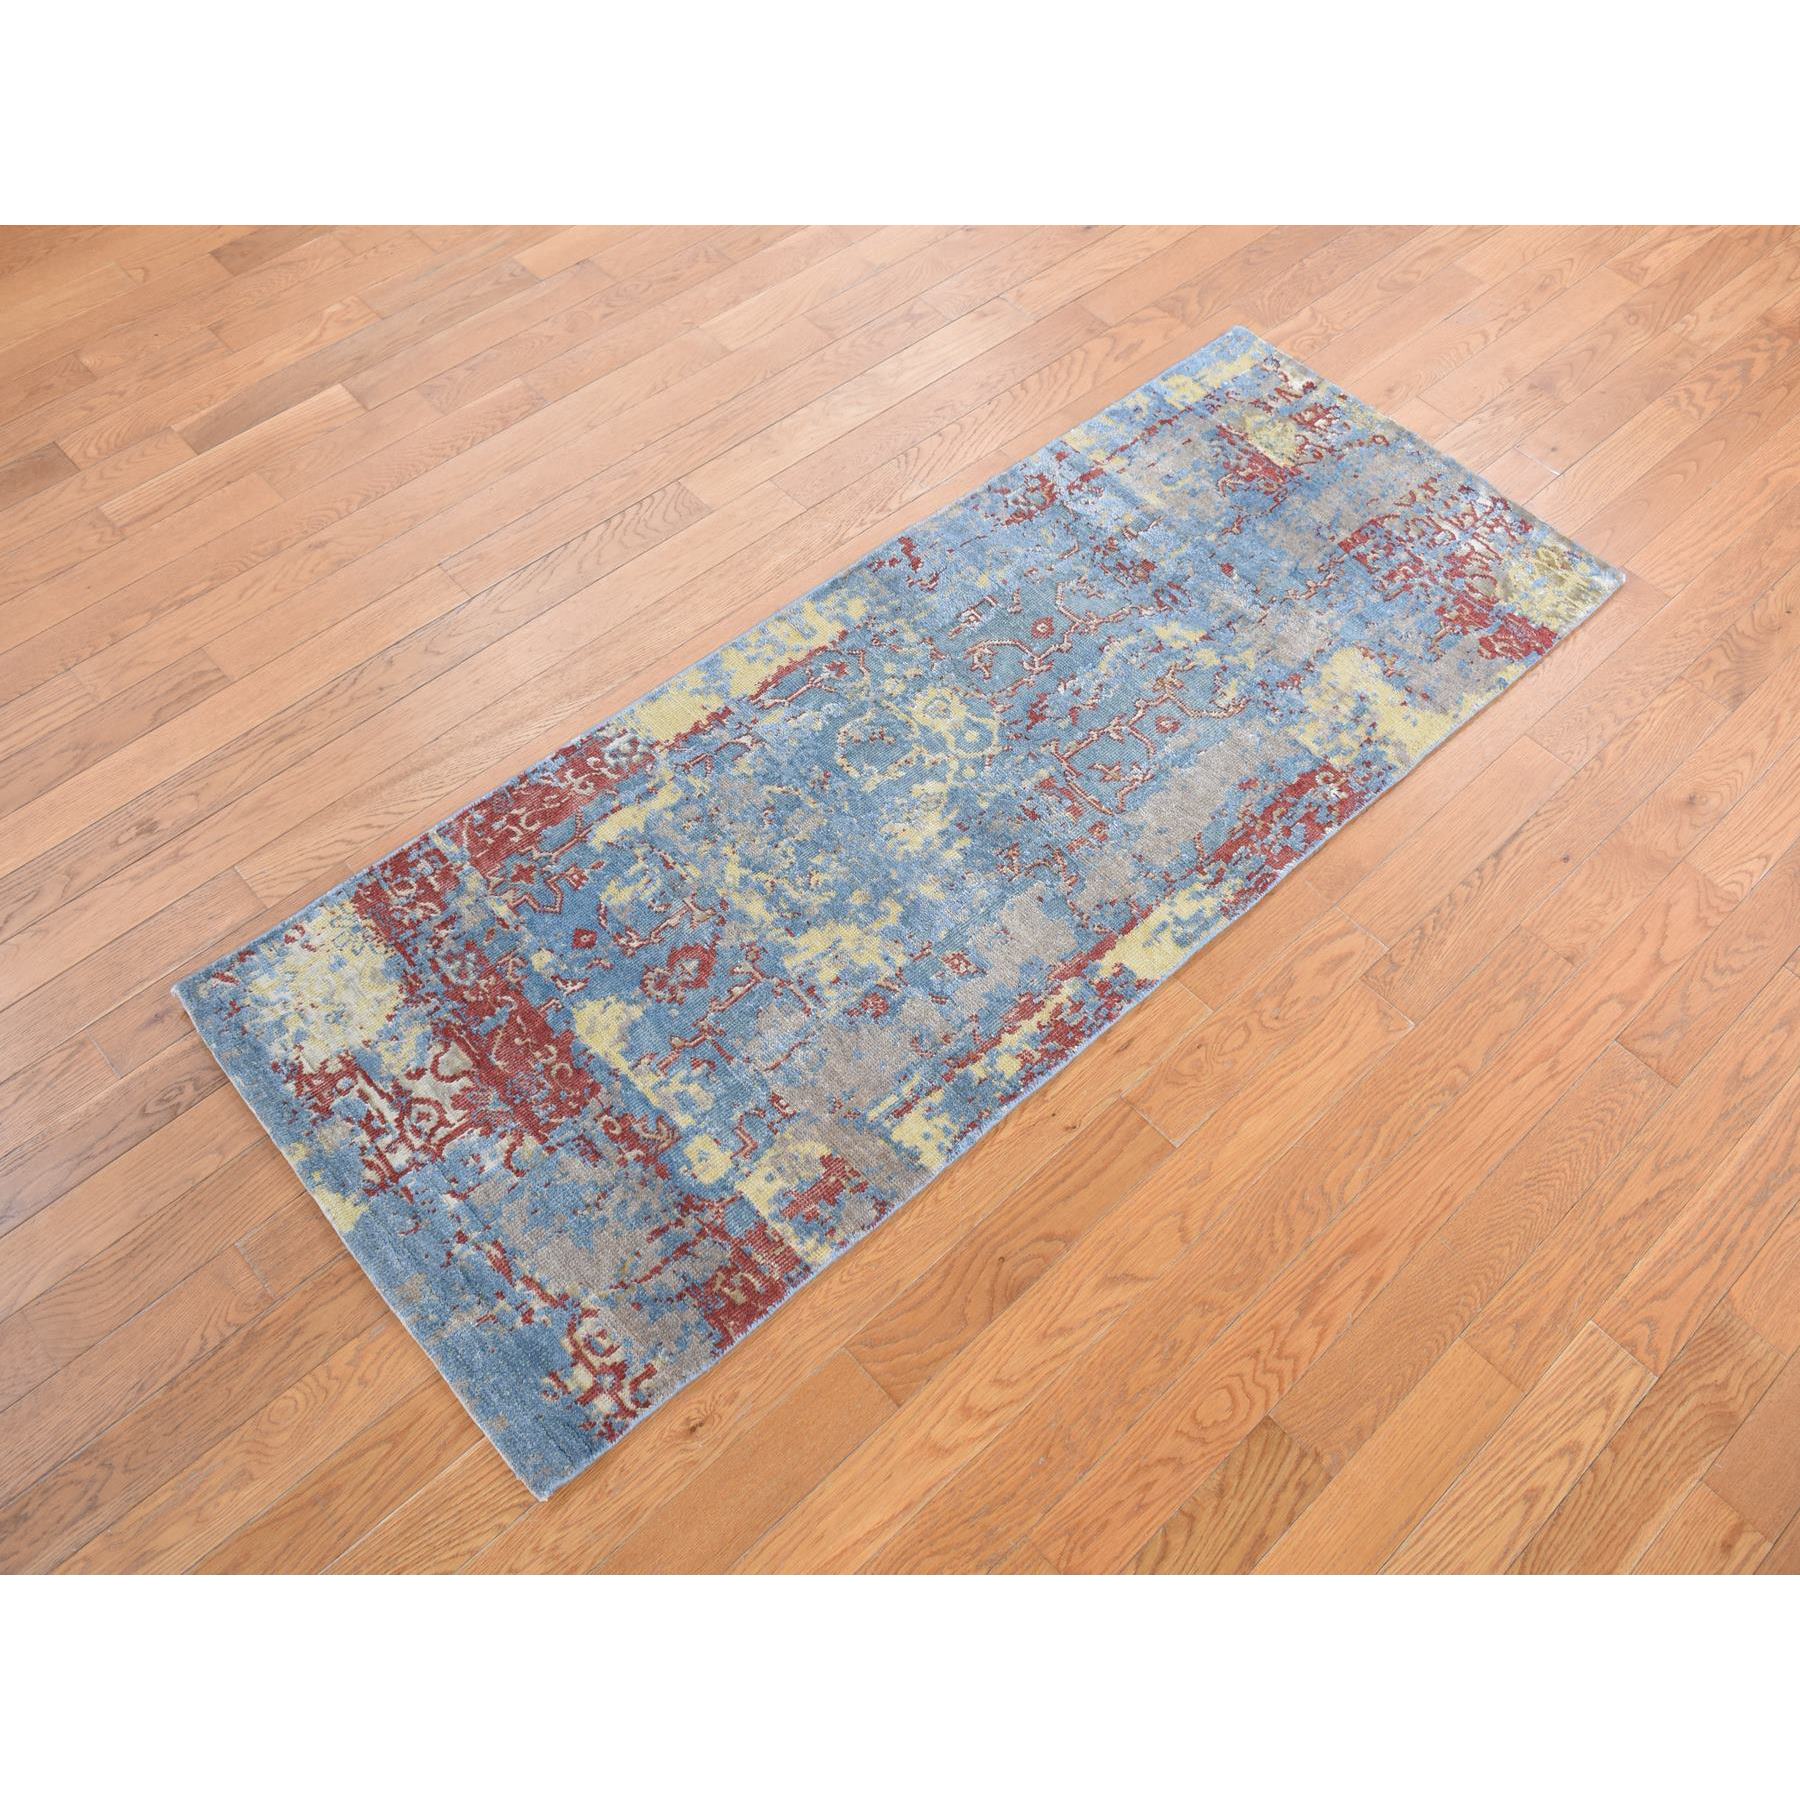  Silk Hand-Knotted Area Rug 2'5